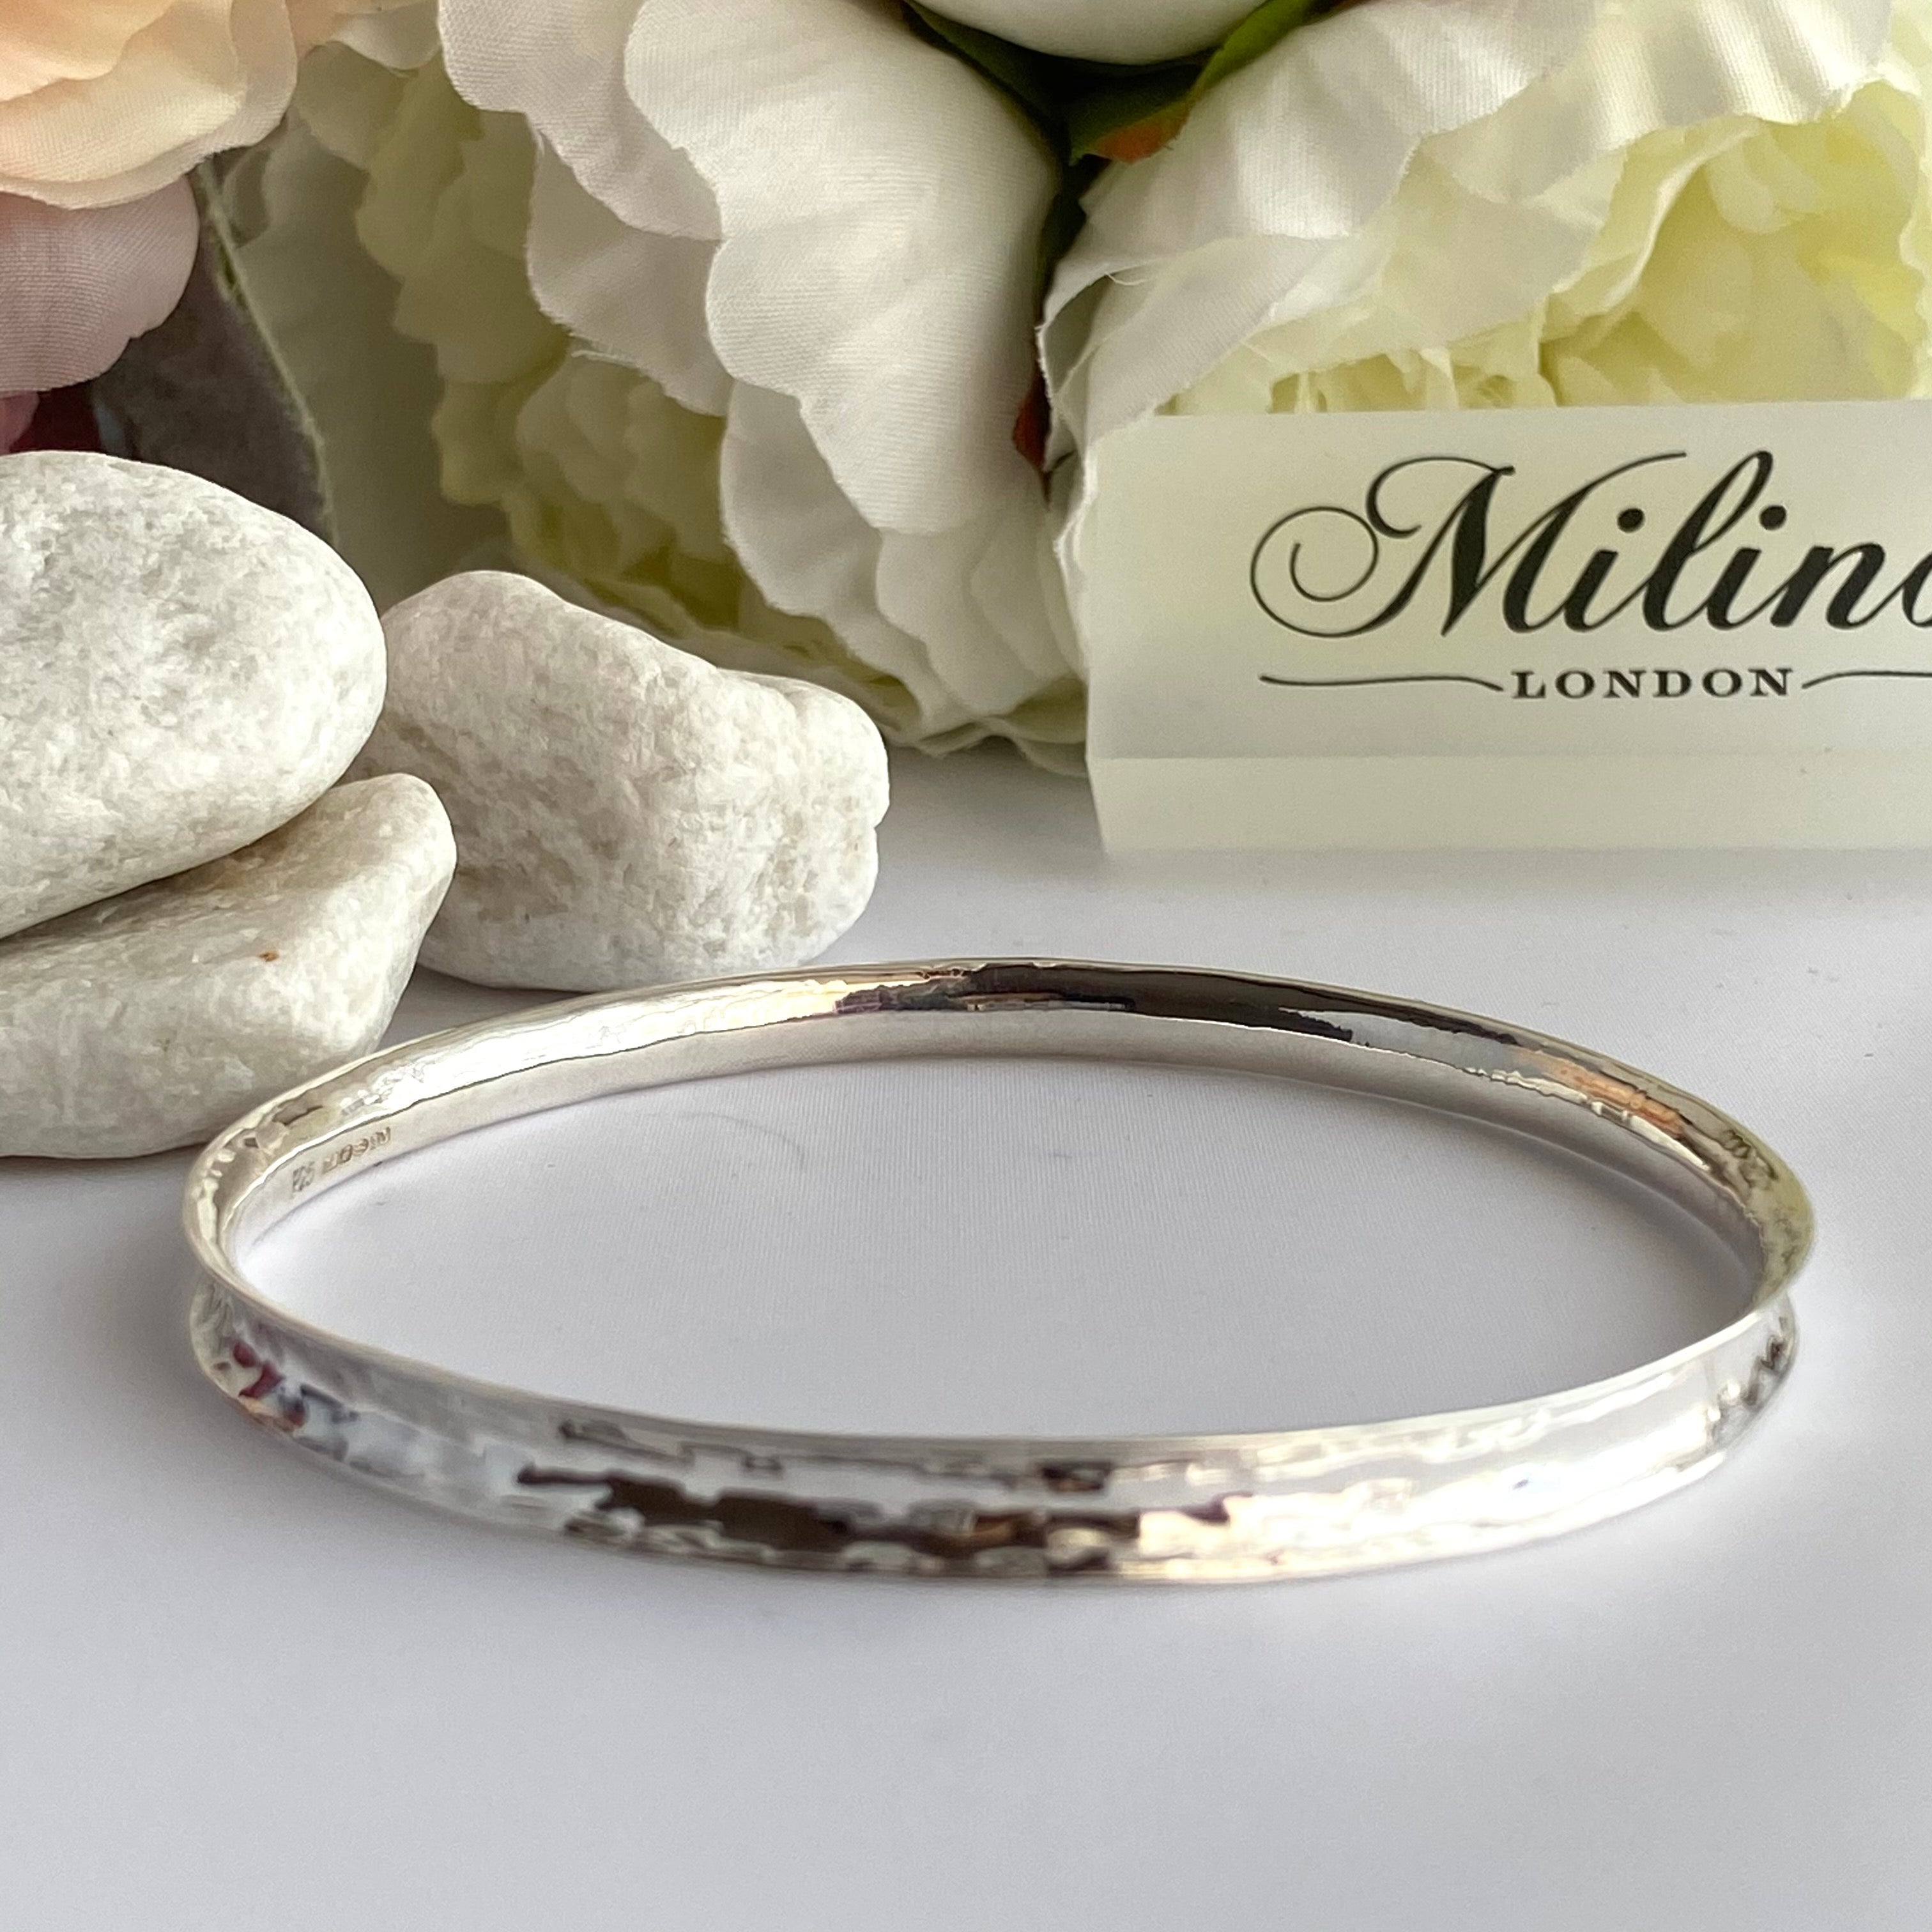 Round Sterling Silver 5mm wide Concave Bangle with a Hammered Finish